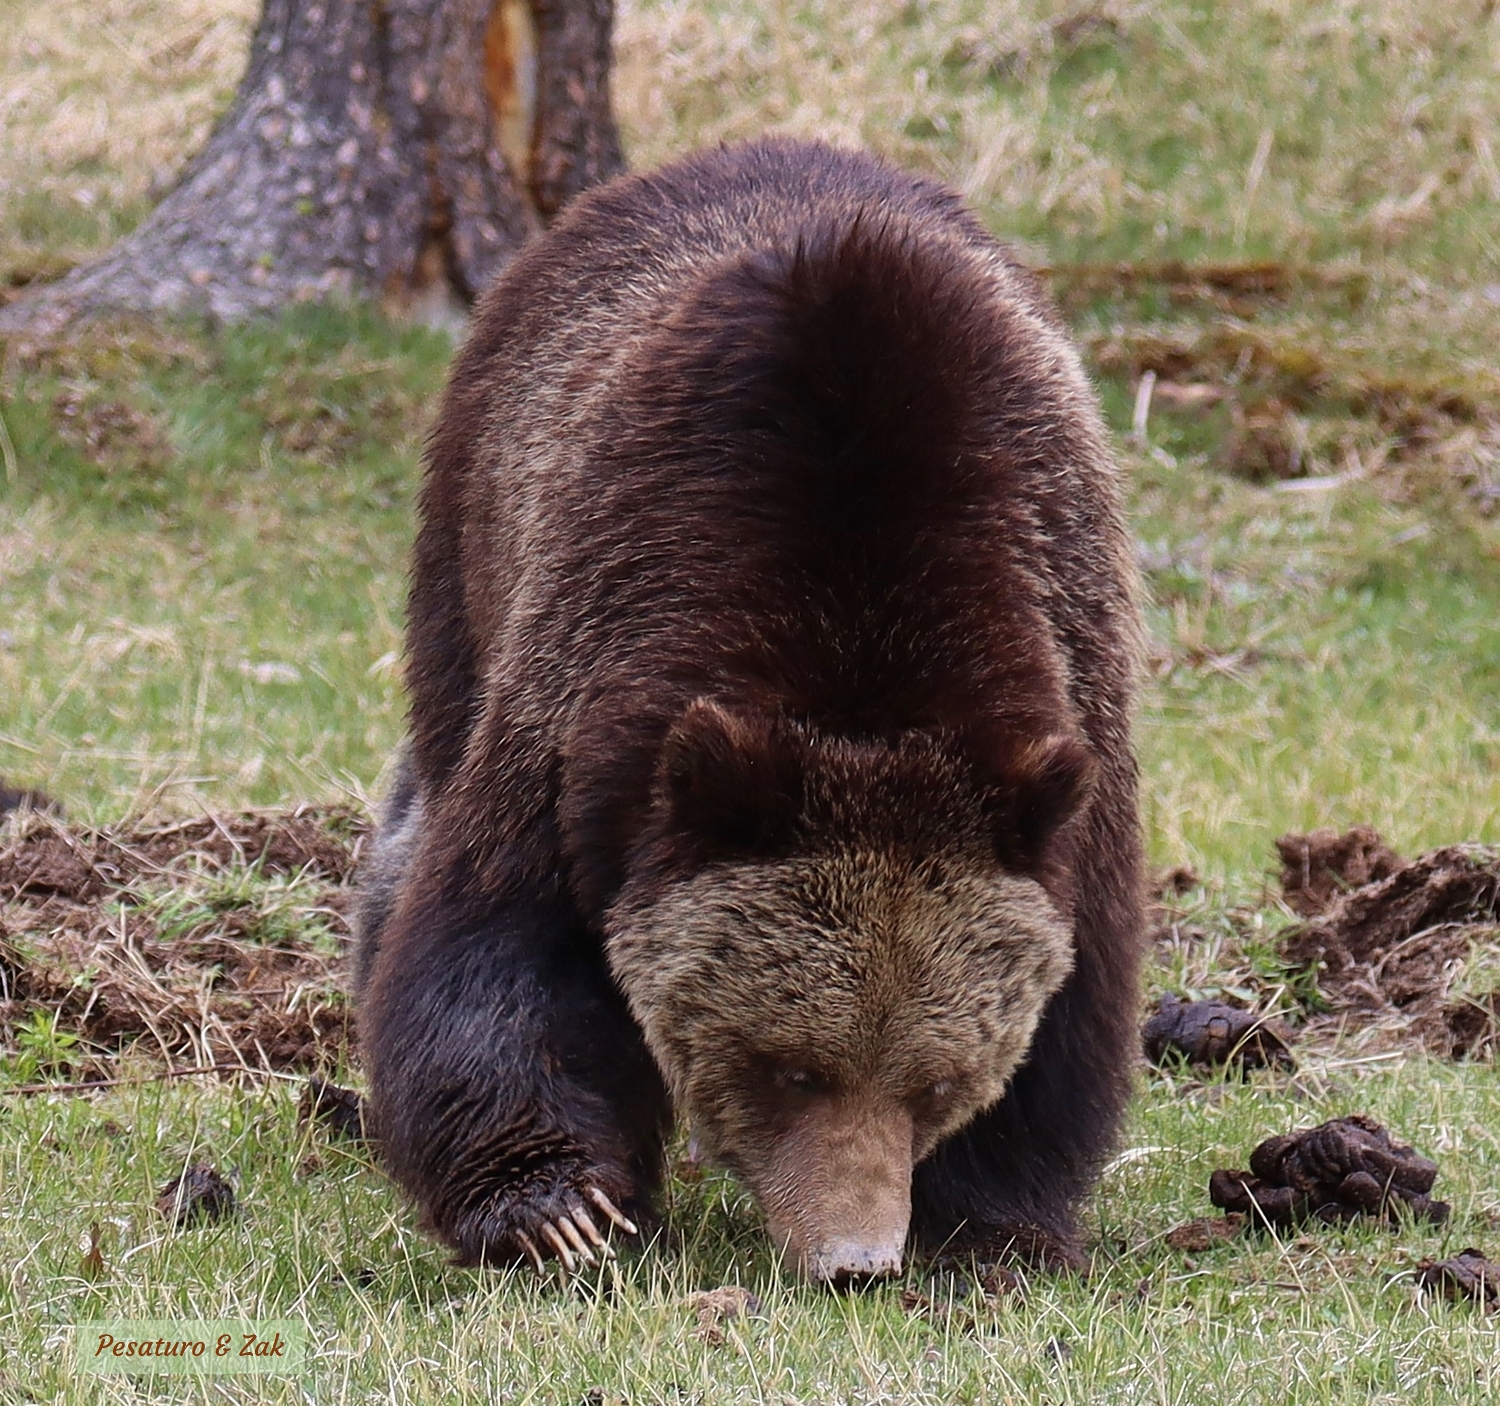 grizzly bear root grubbing at Yellowstone